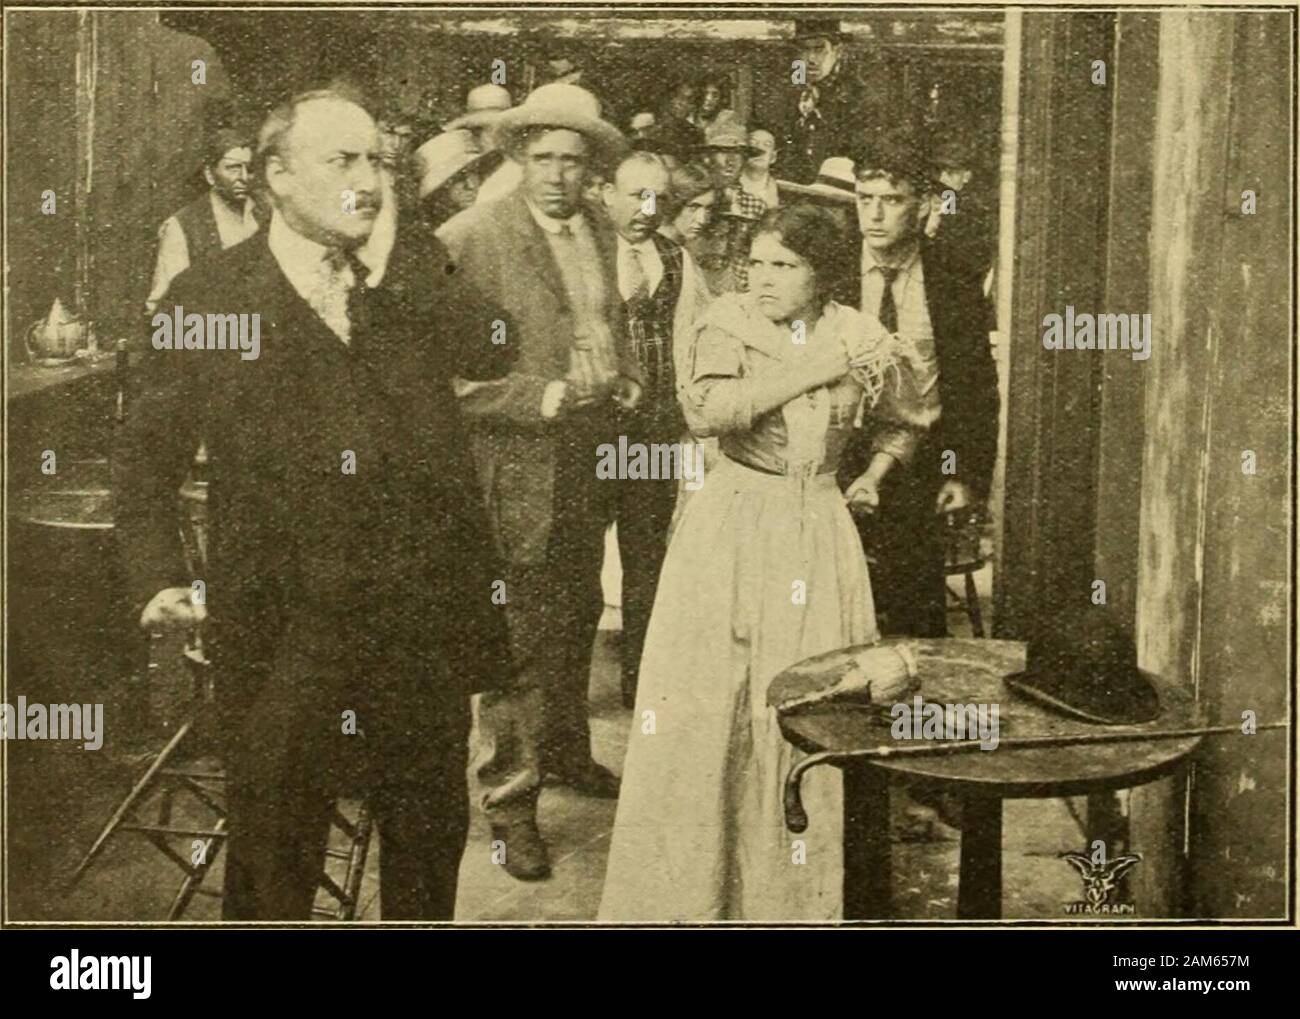 Cinema News and Property Gazette (1912) . the vmu SPECANNOUNCE of the Powerful and THE MILLS FROM THE NOVEL B Approximate Total Length 3,079 feet. Ir THE MOST VIGOROUS ACTING BY THE A Modern Drama that palpitates with fire and power. AN EXPERTS. A FILM YOU CANNOT Remember, its i All Subjects Supplied ot THE VITAGRAPH 15 and 17.CECICHARING CROS Telegrams— VITGRAF, LONDON. &lt; December, 1912. THE CINEMA. 41 GRAPH CO., Ltd. IAL MENT Stock Photo